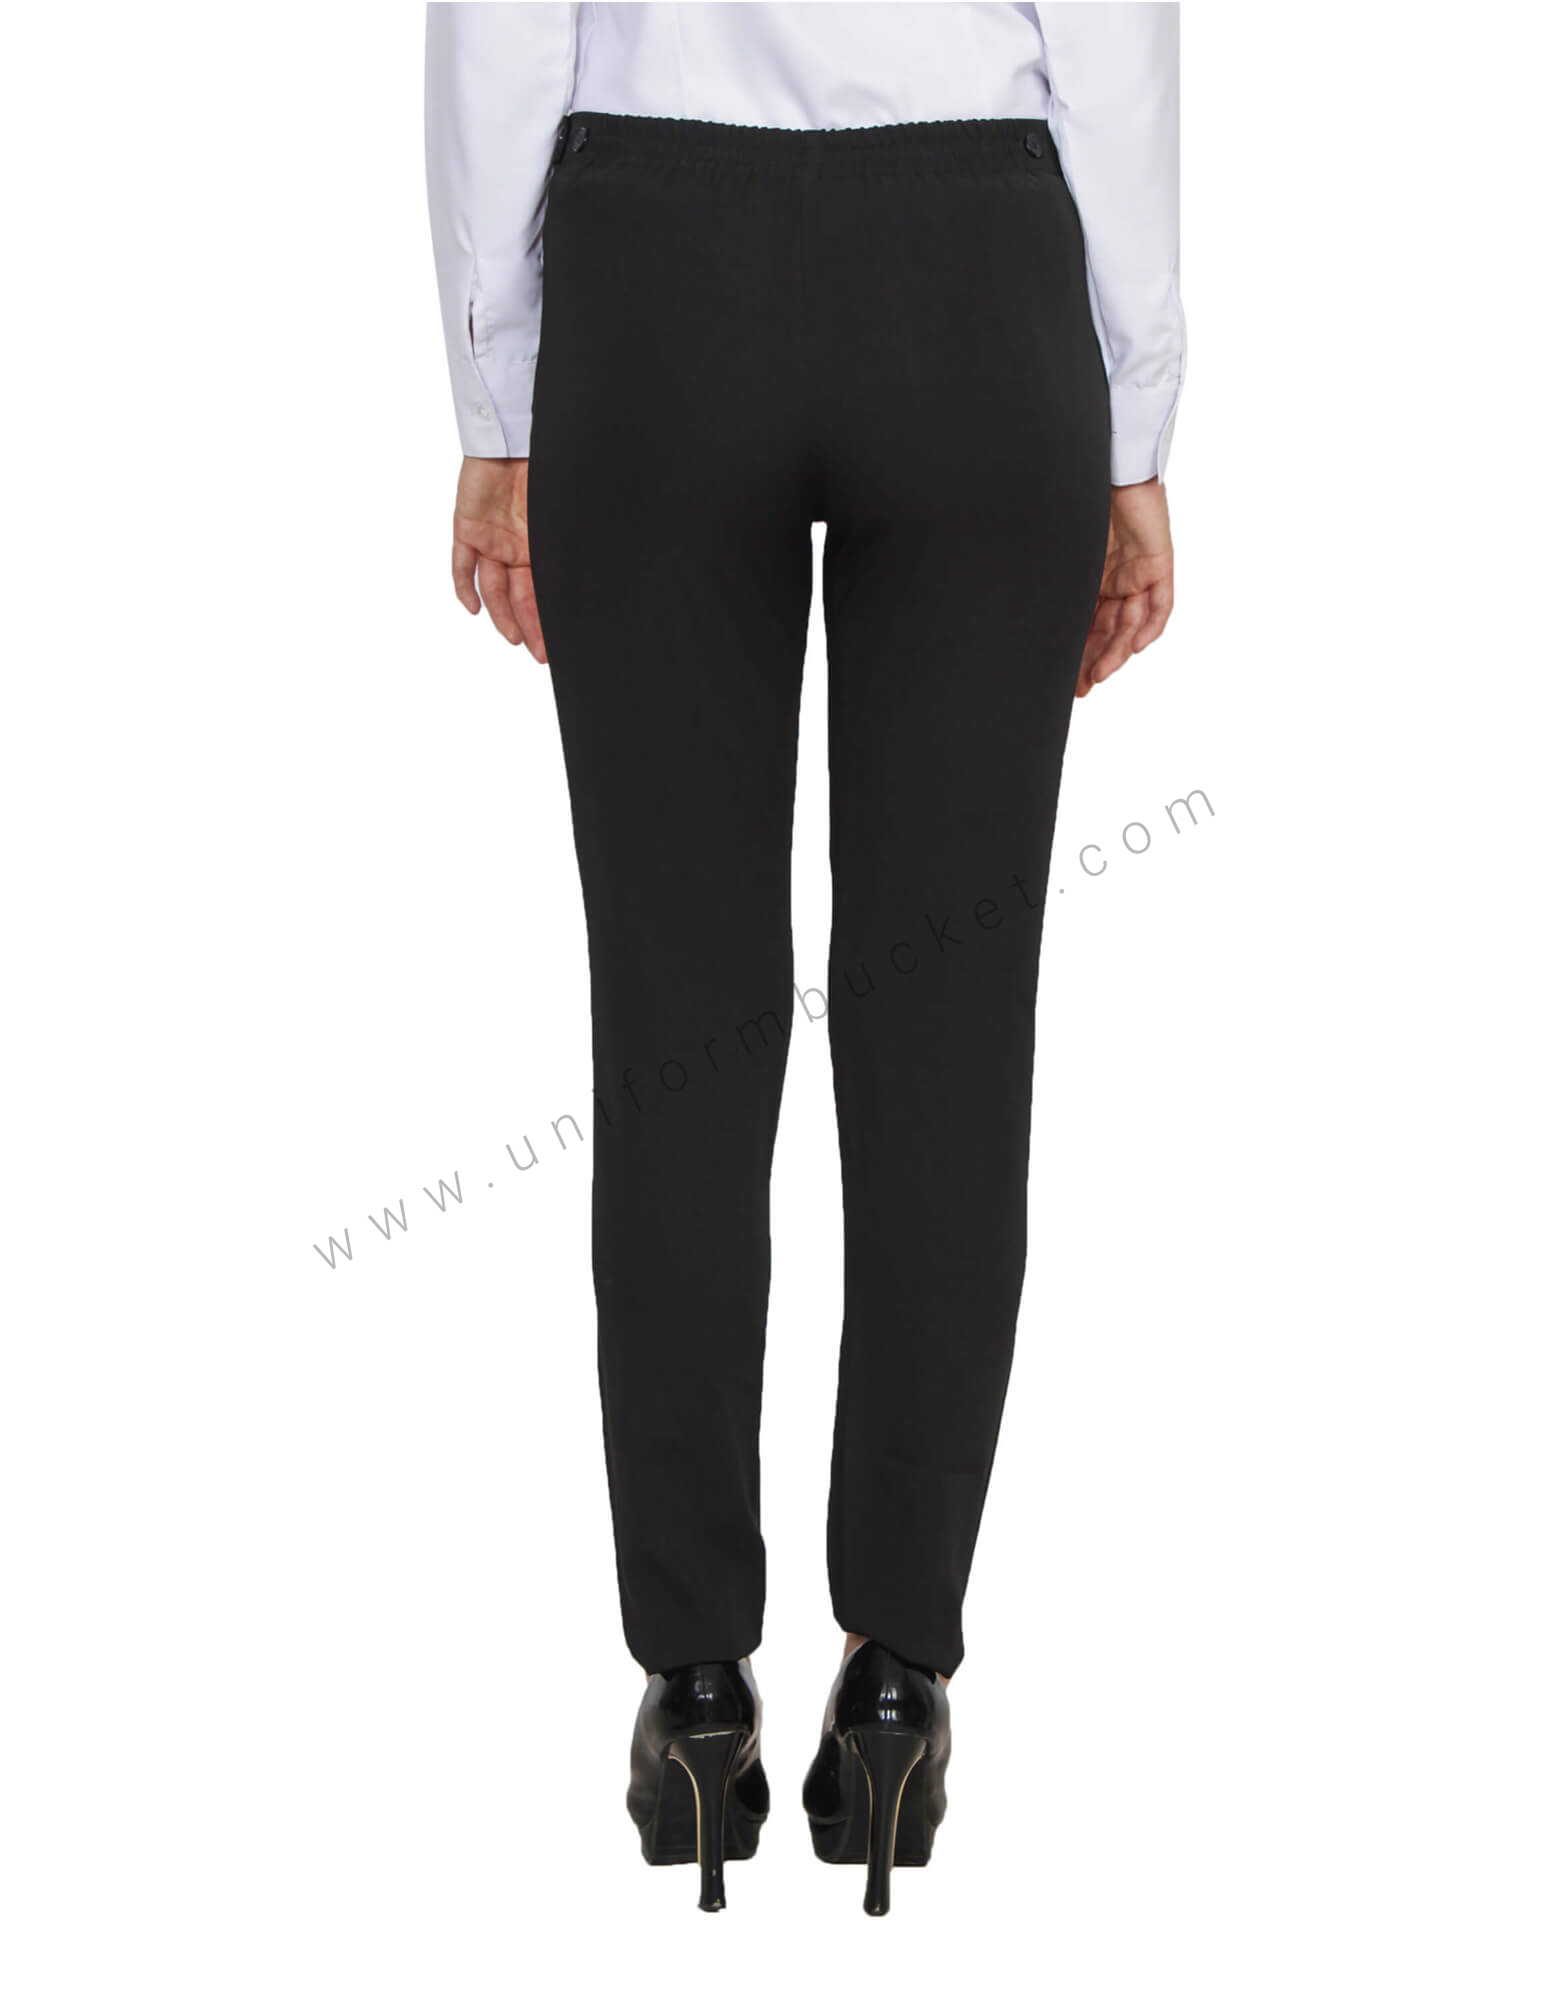 Black Formal Trouser With Adjuster Buttons